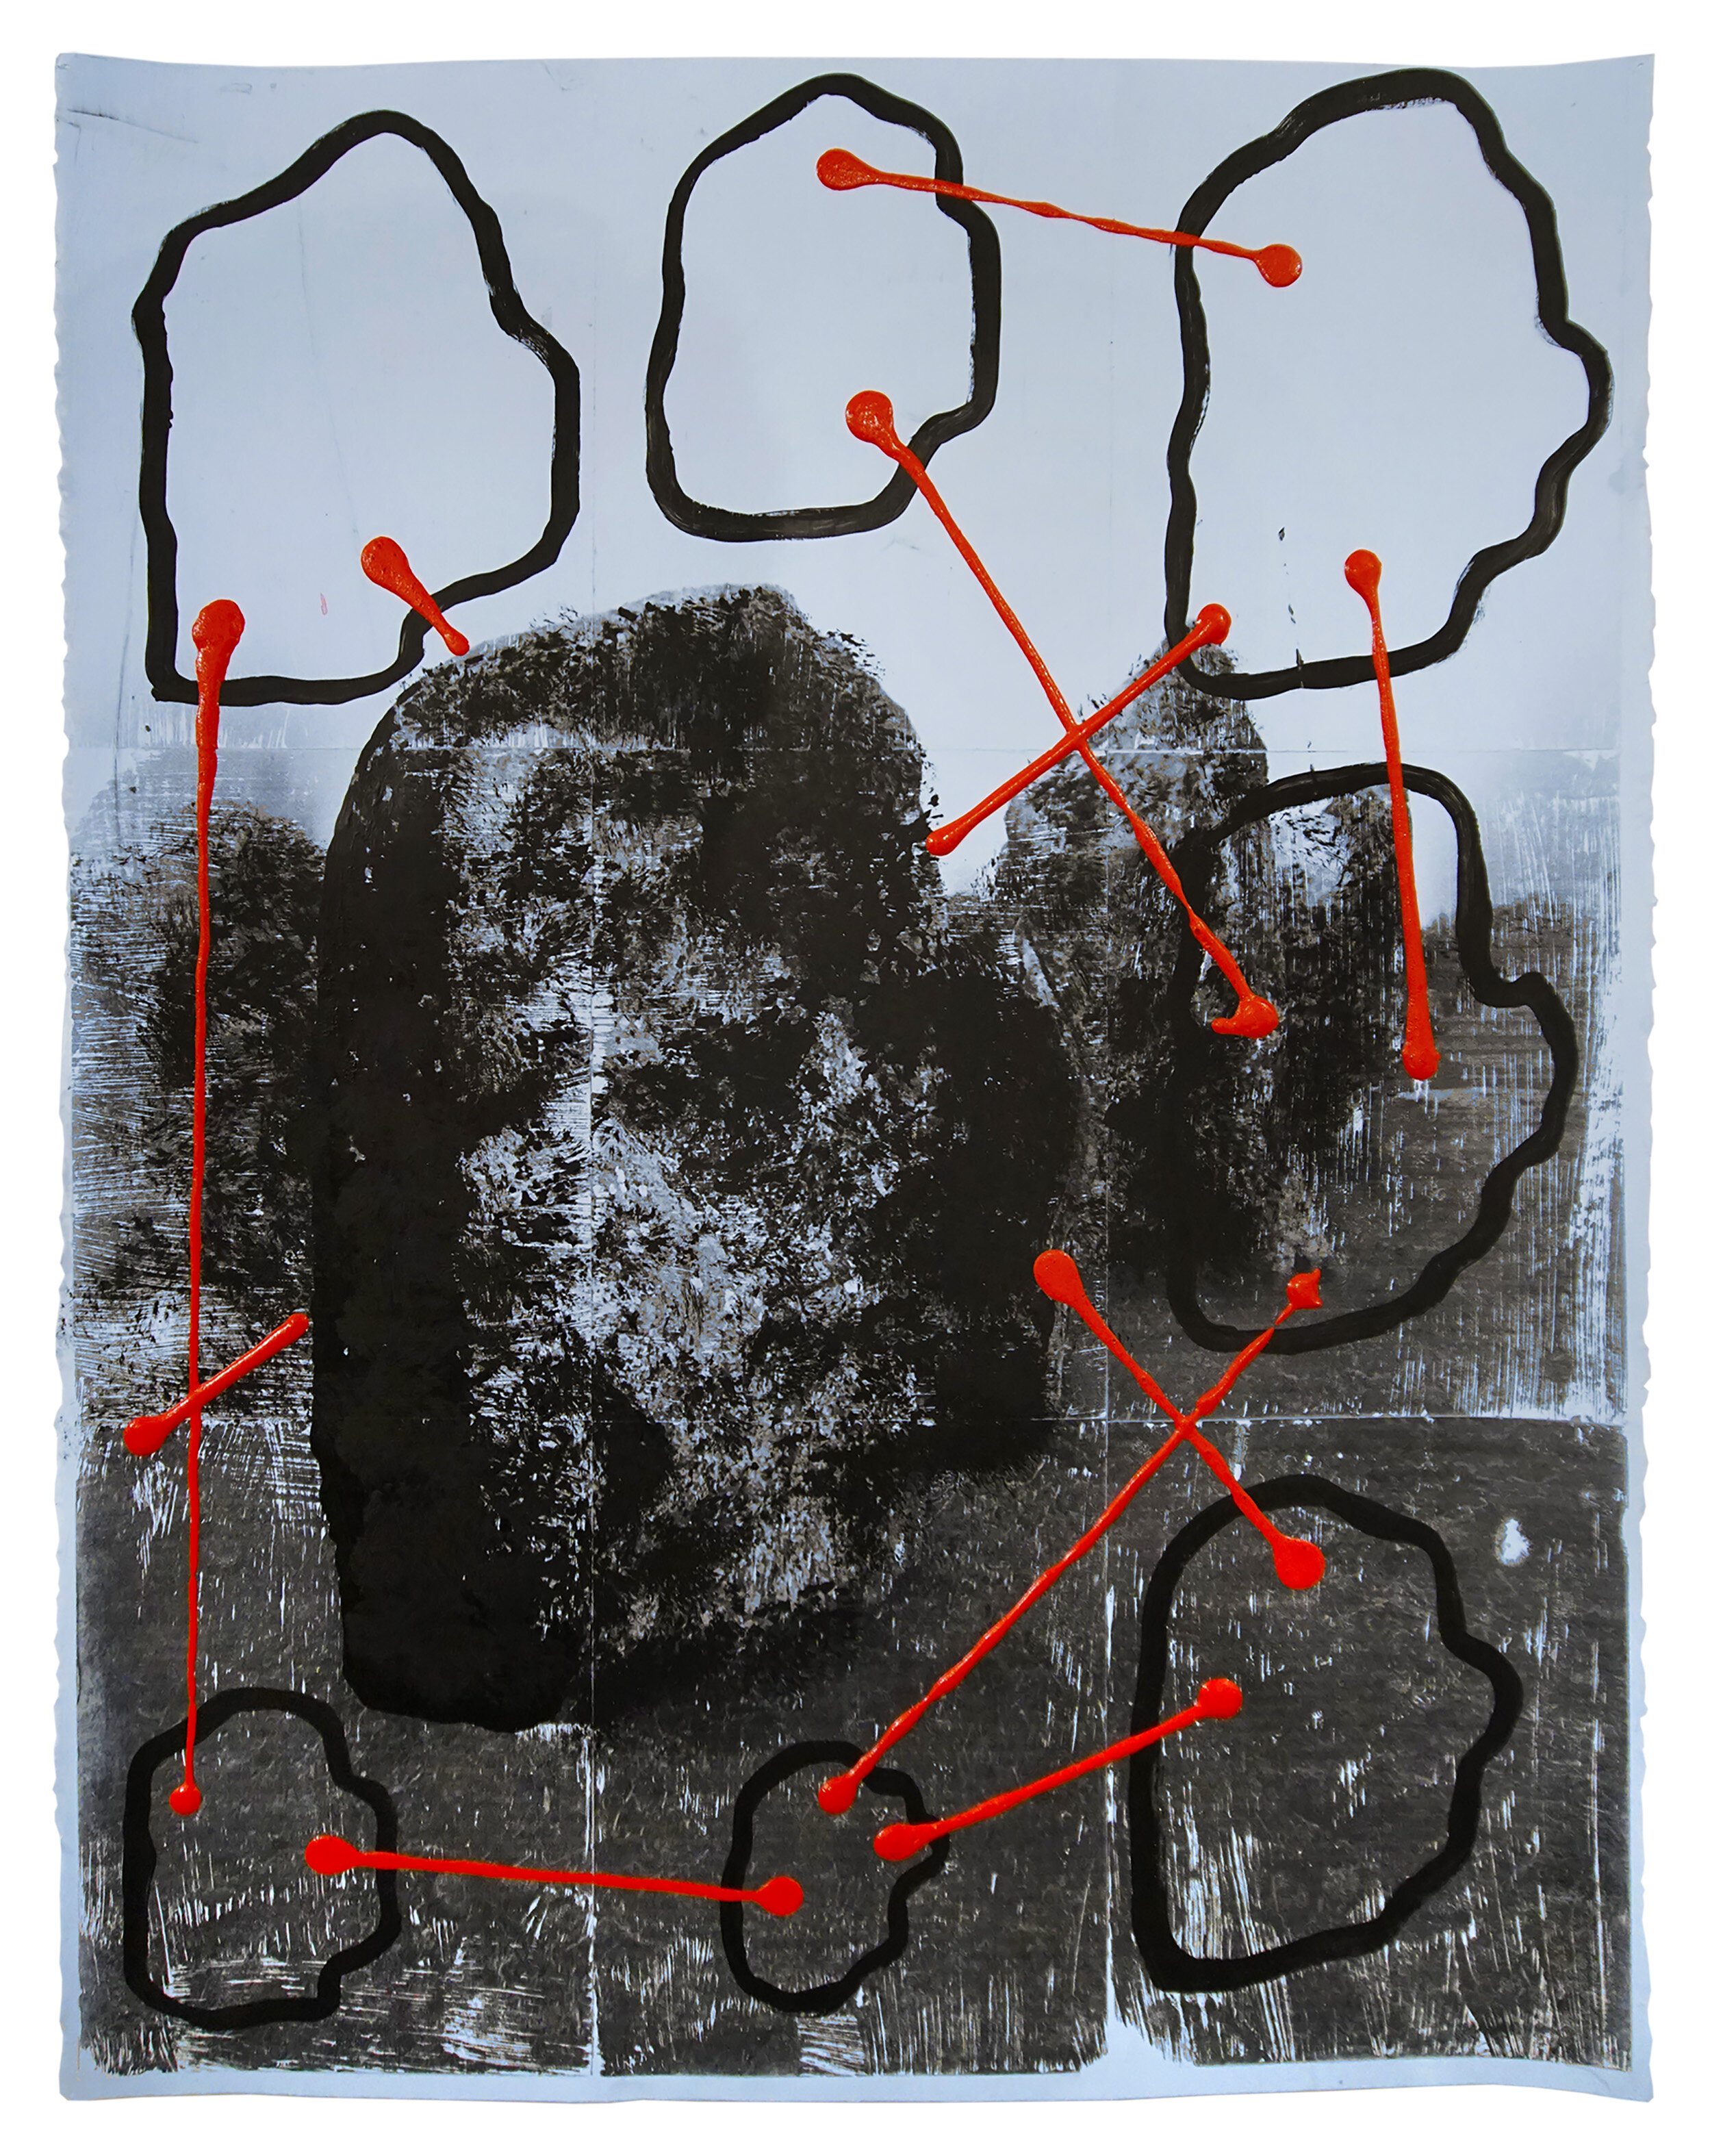   Geoglyphology  Photo Transfer, acrylic and ink on paper 30 x 22 inches 2020 